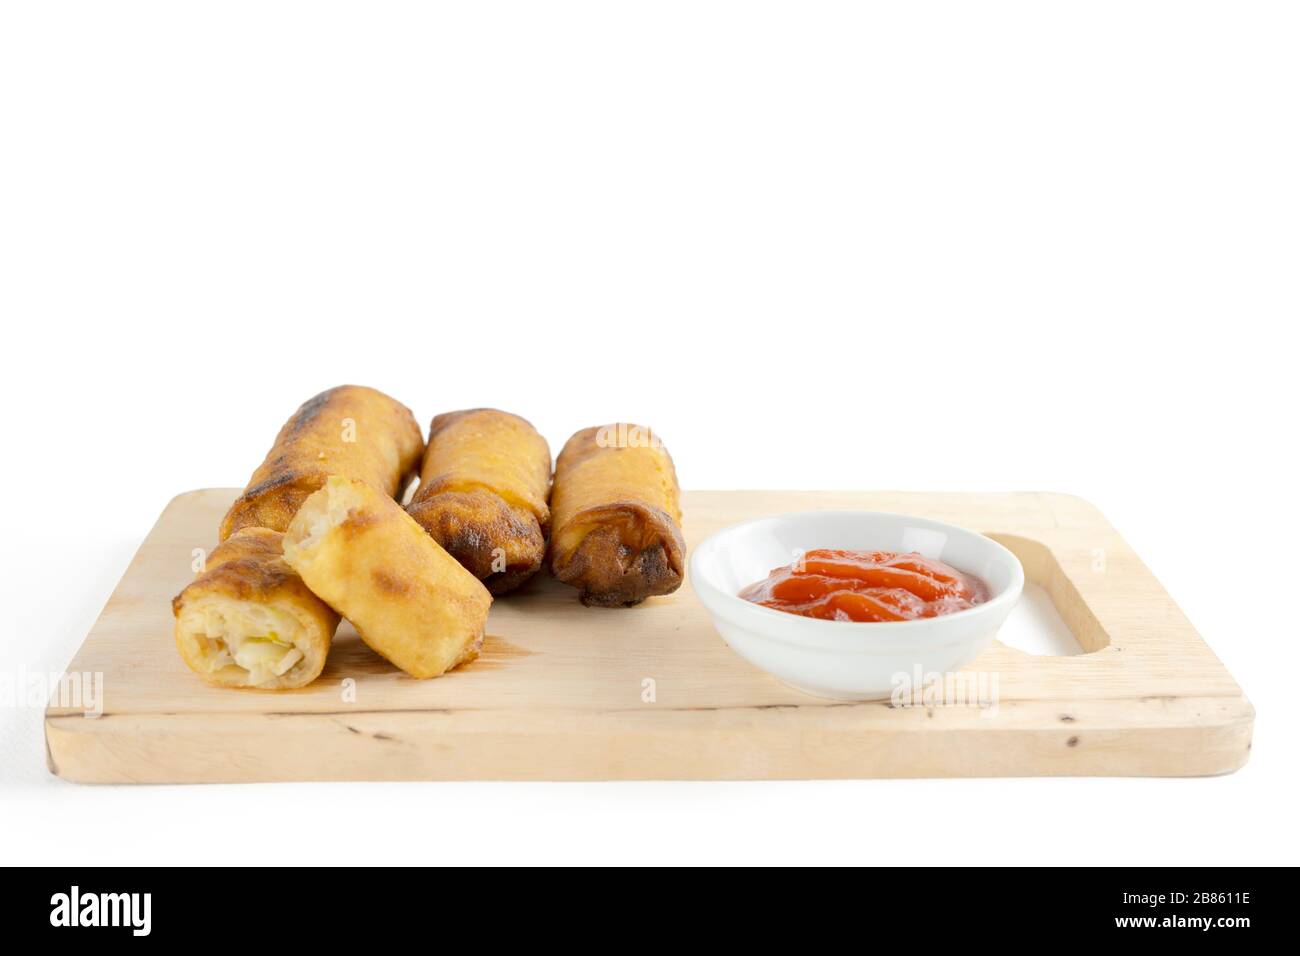 Spring rolls are from Chinese that we have eaten in the Dim Sum menu., ketchup. The original filling is minced pork vermicelli.  on white background. Stock Photo